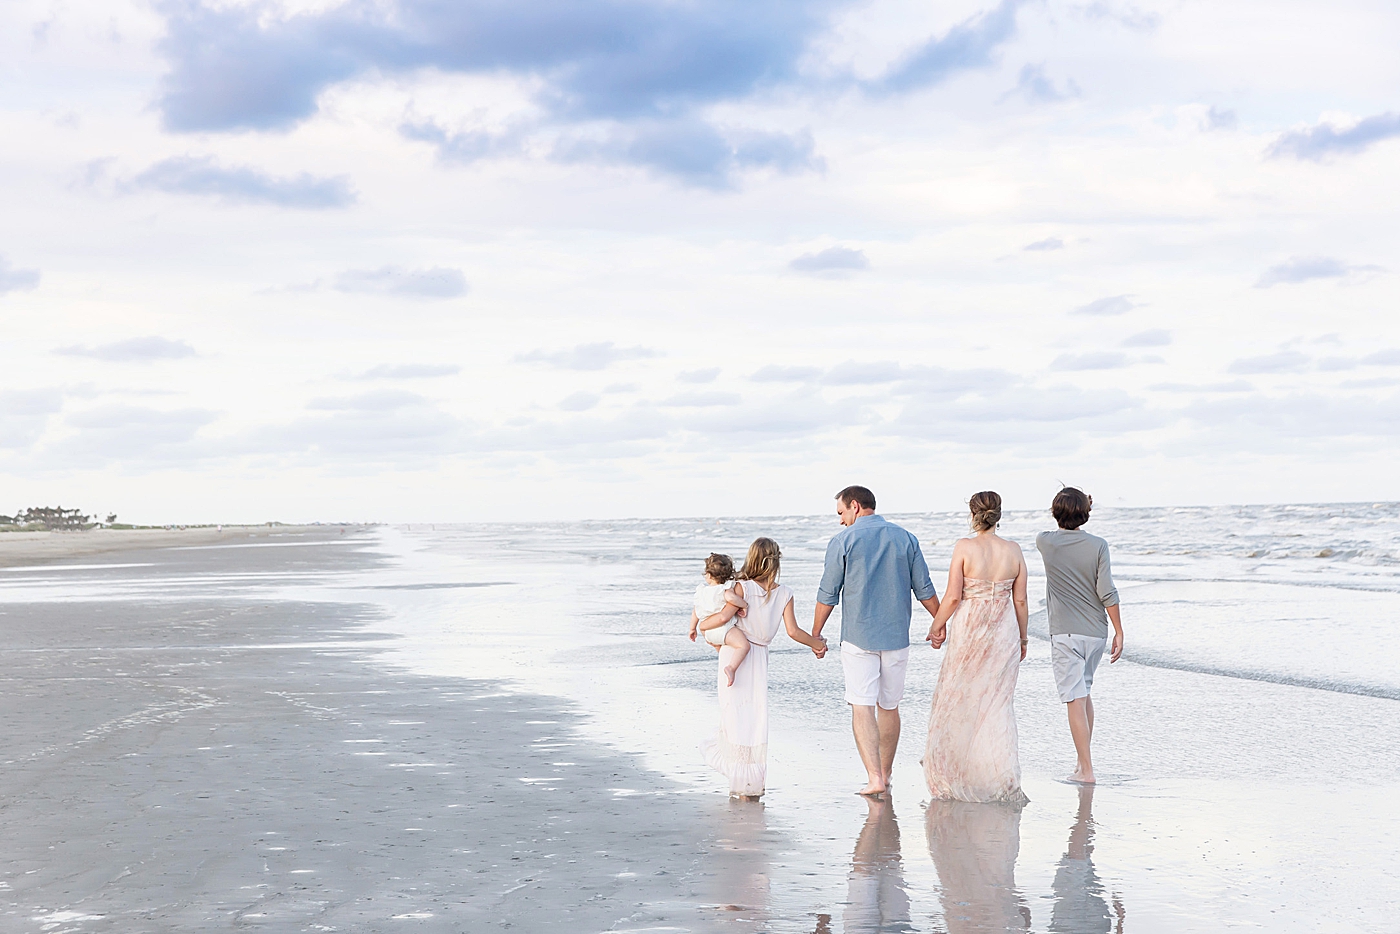 Family walking on the beach holding hands. Photo by Fresh Light Photography.